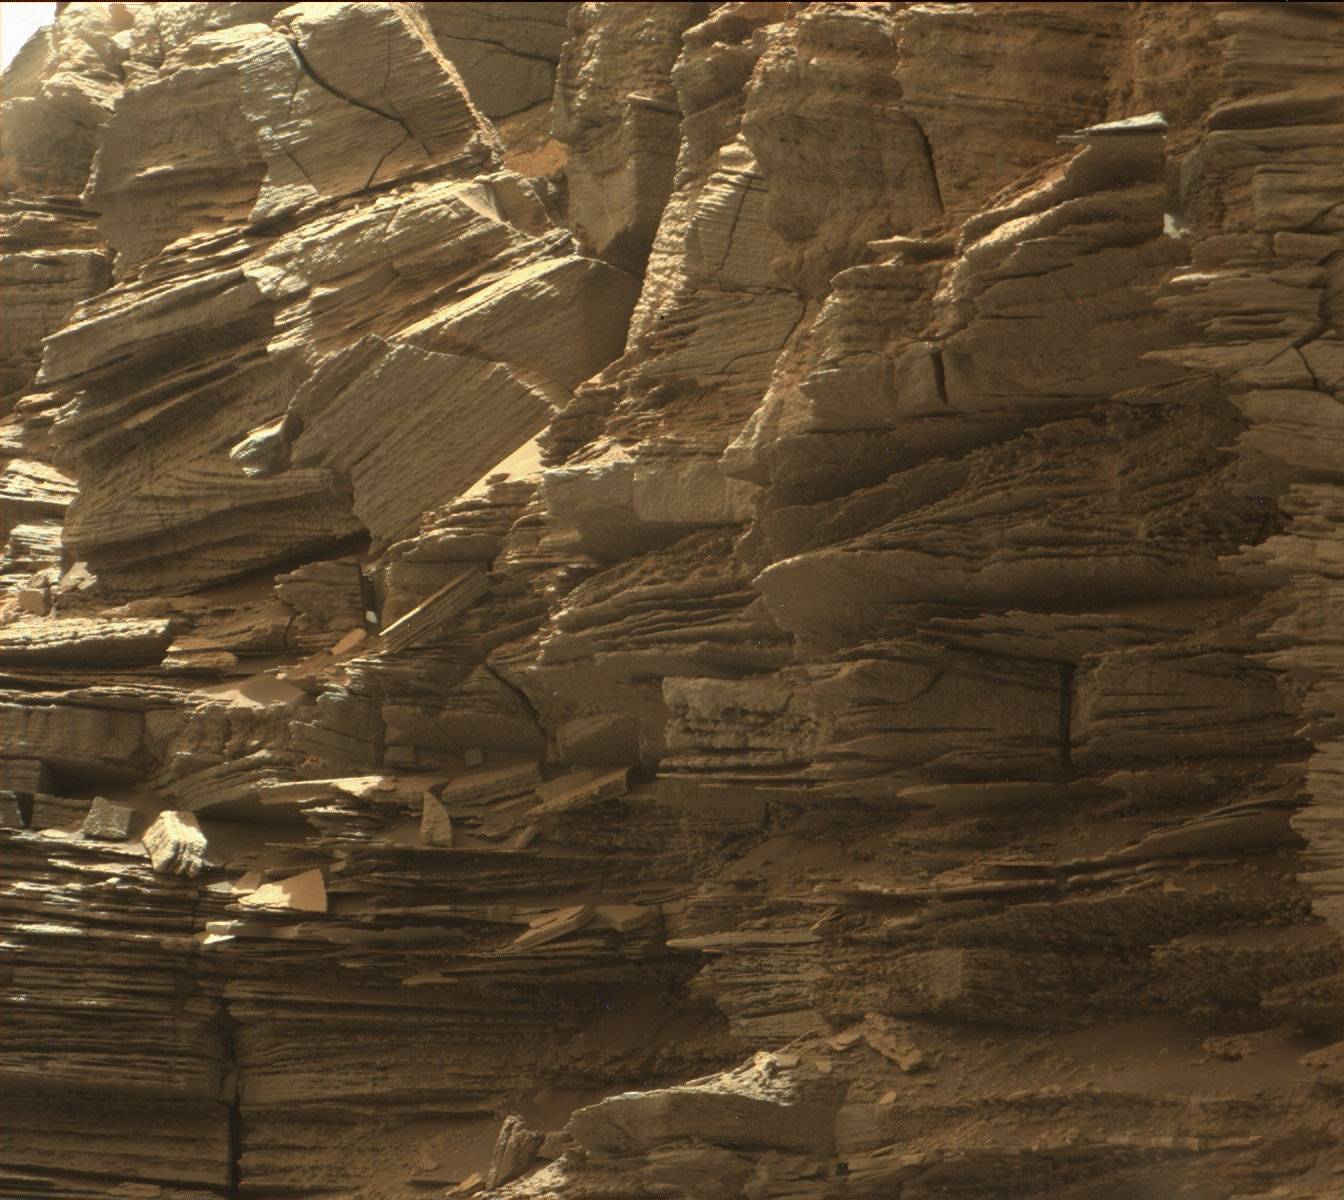 Rock layers in the Murray Buttes area in lower Mount Sharp They look like rocks formed at the bottom of lakes and their chemistry proves it.